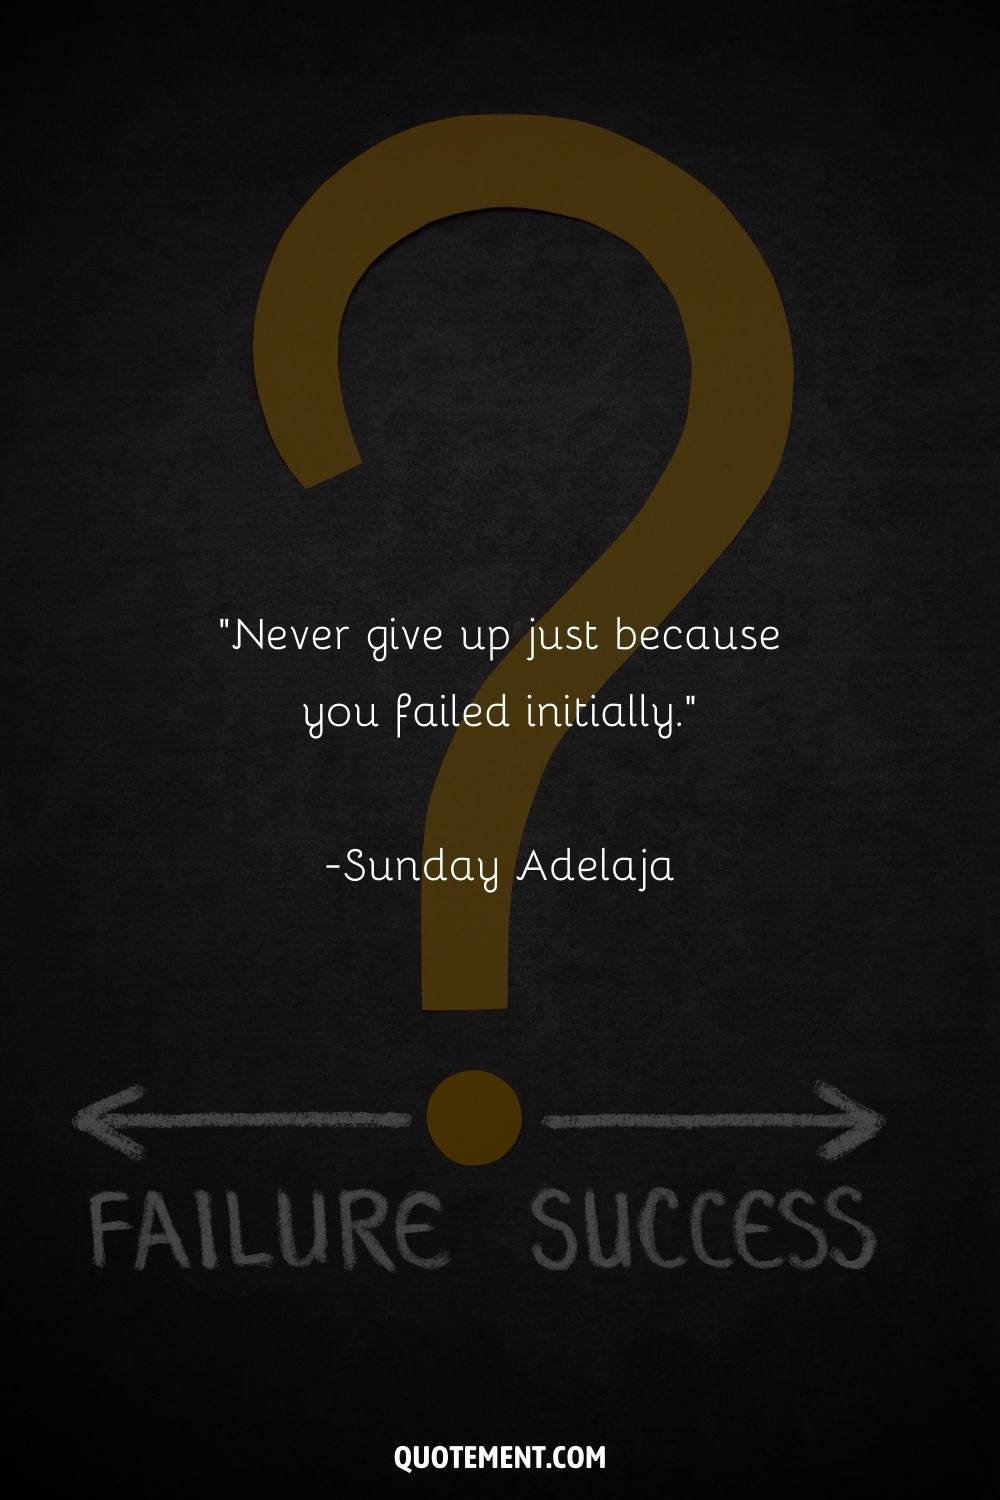 “Never give up just because you failed initially” ― Sunday Adelaja